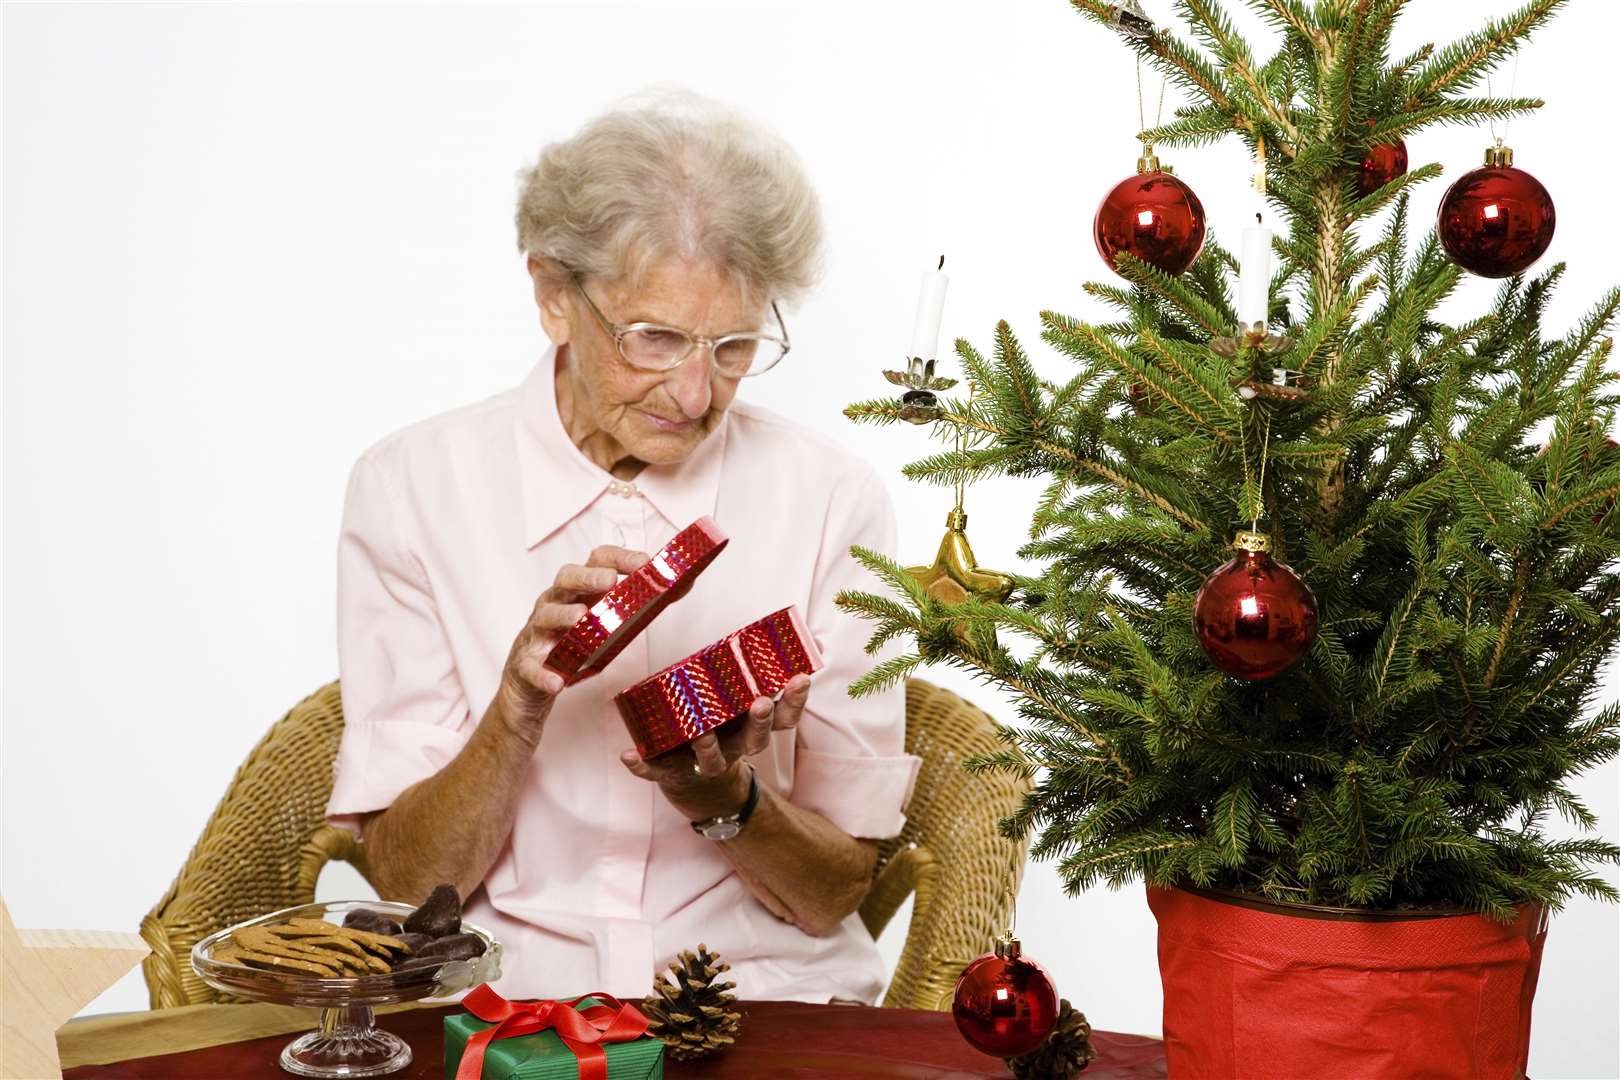 Sharing gifts can mean so much. Picture: Getty Images.